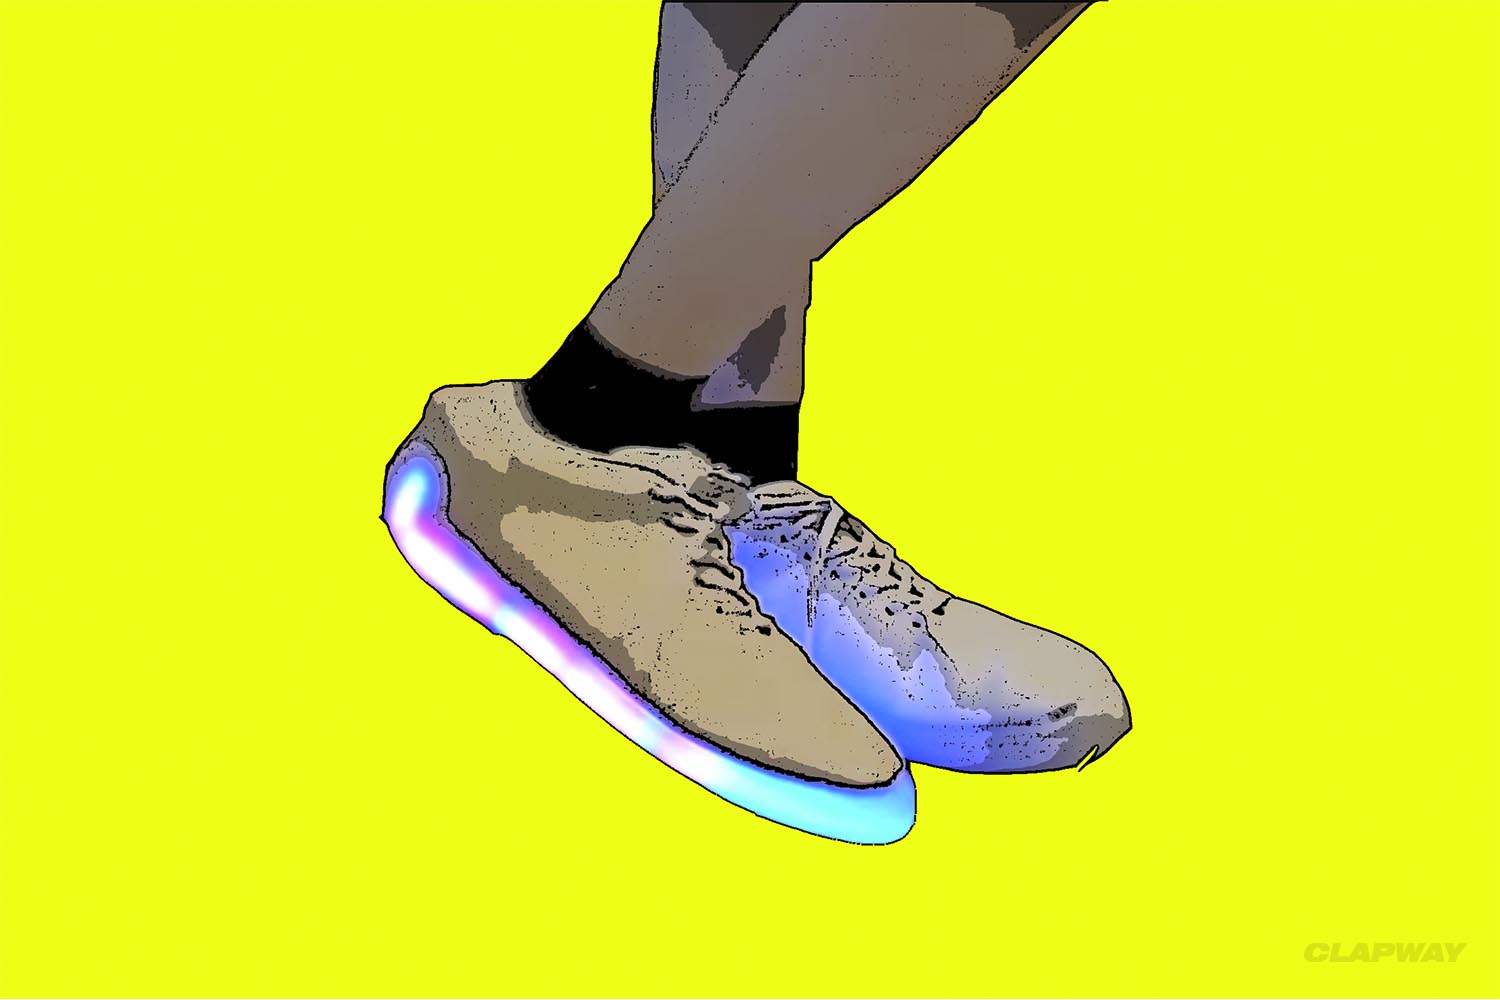 Japanese Startup Made a Better Shoes Design Than Adidas or Nike  Clapway